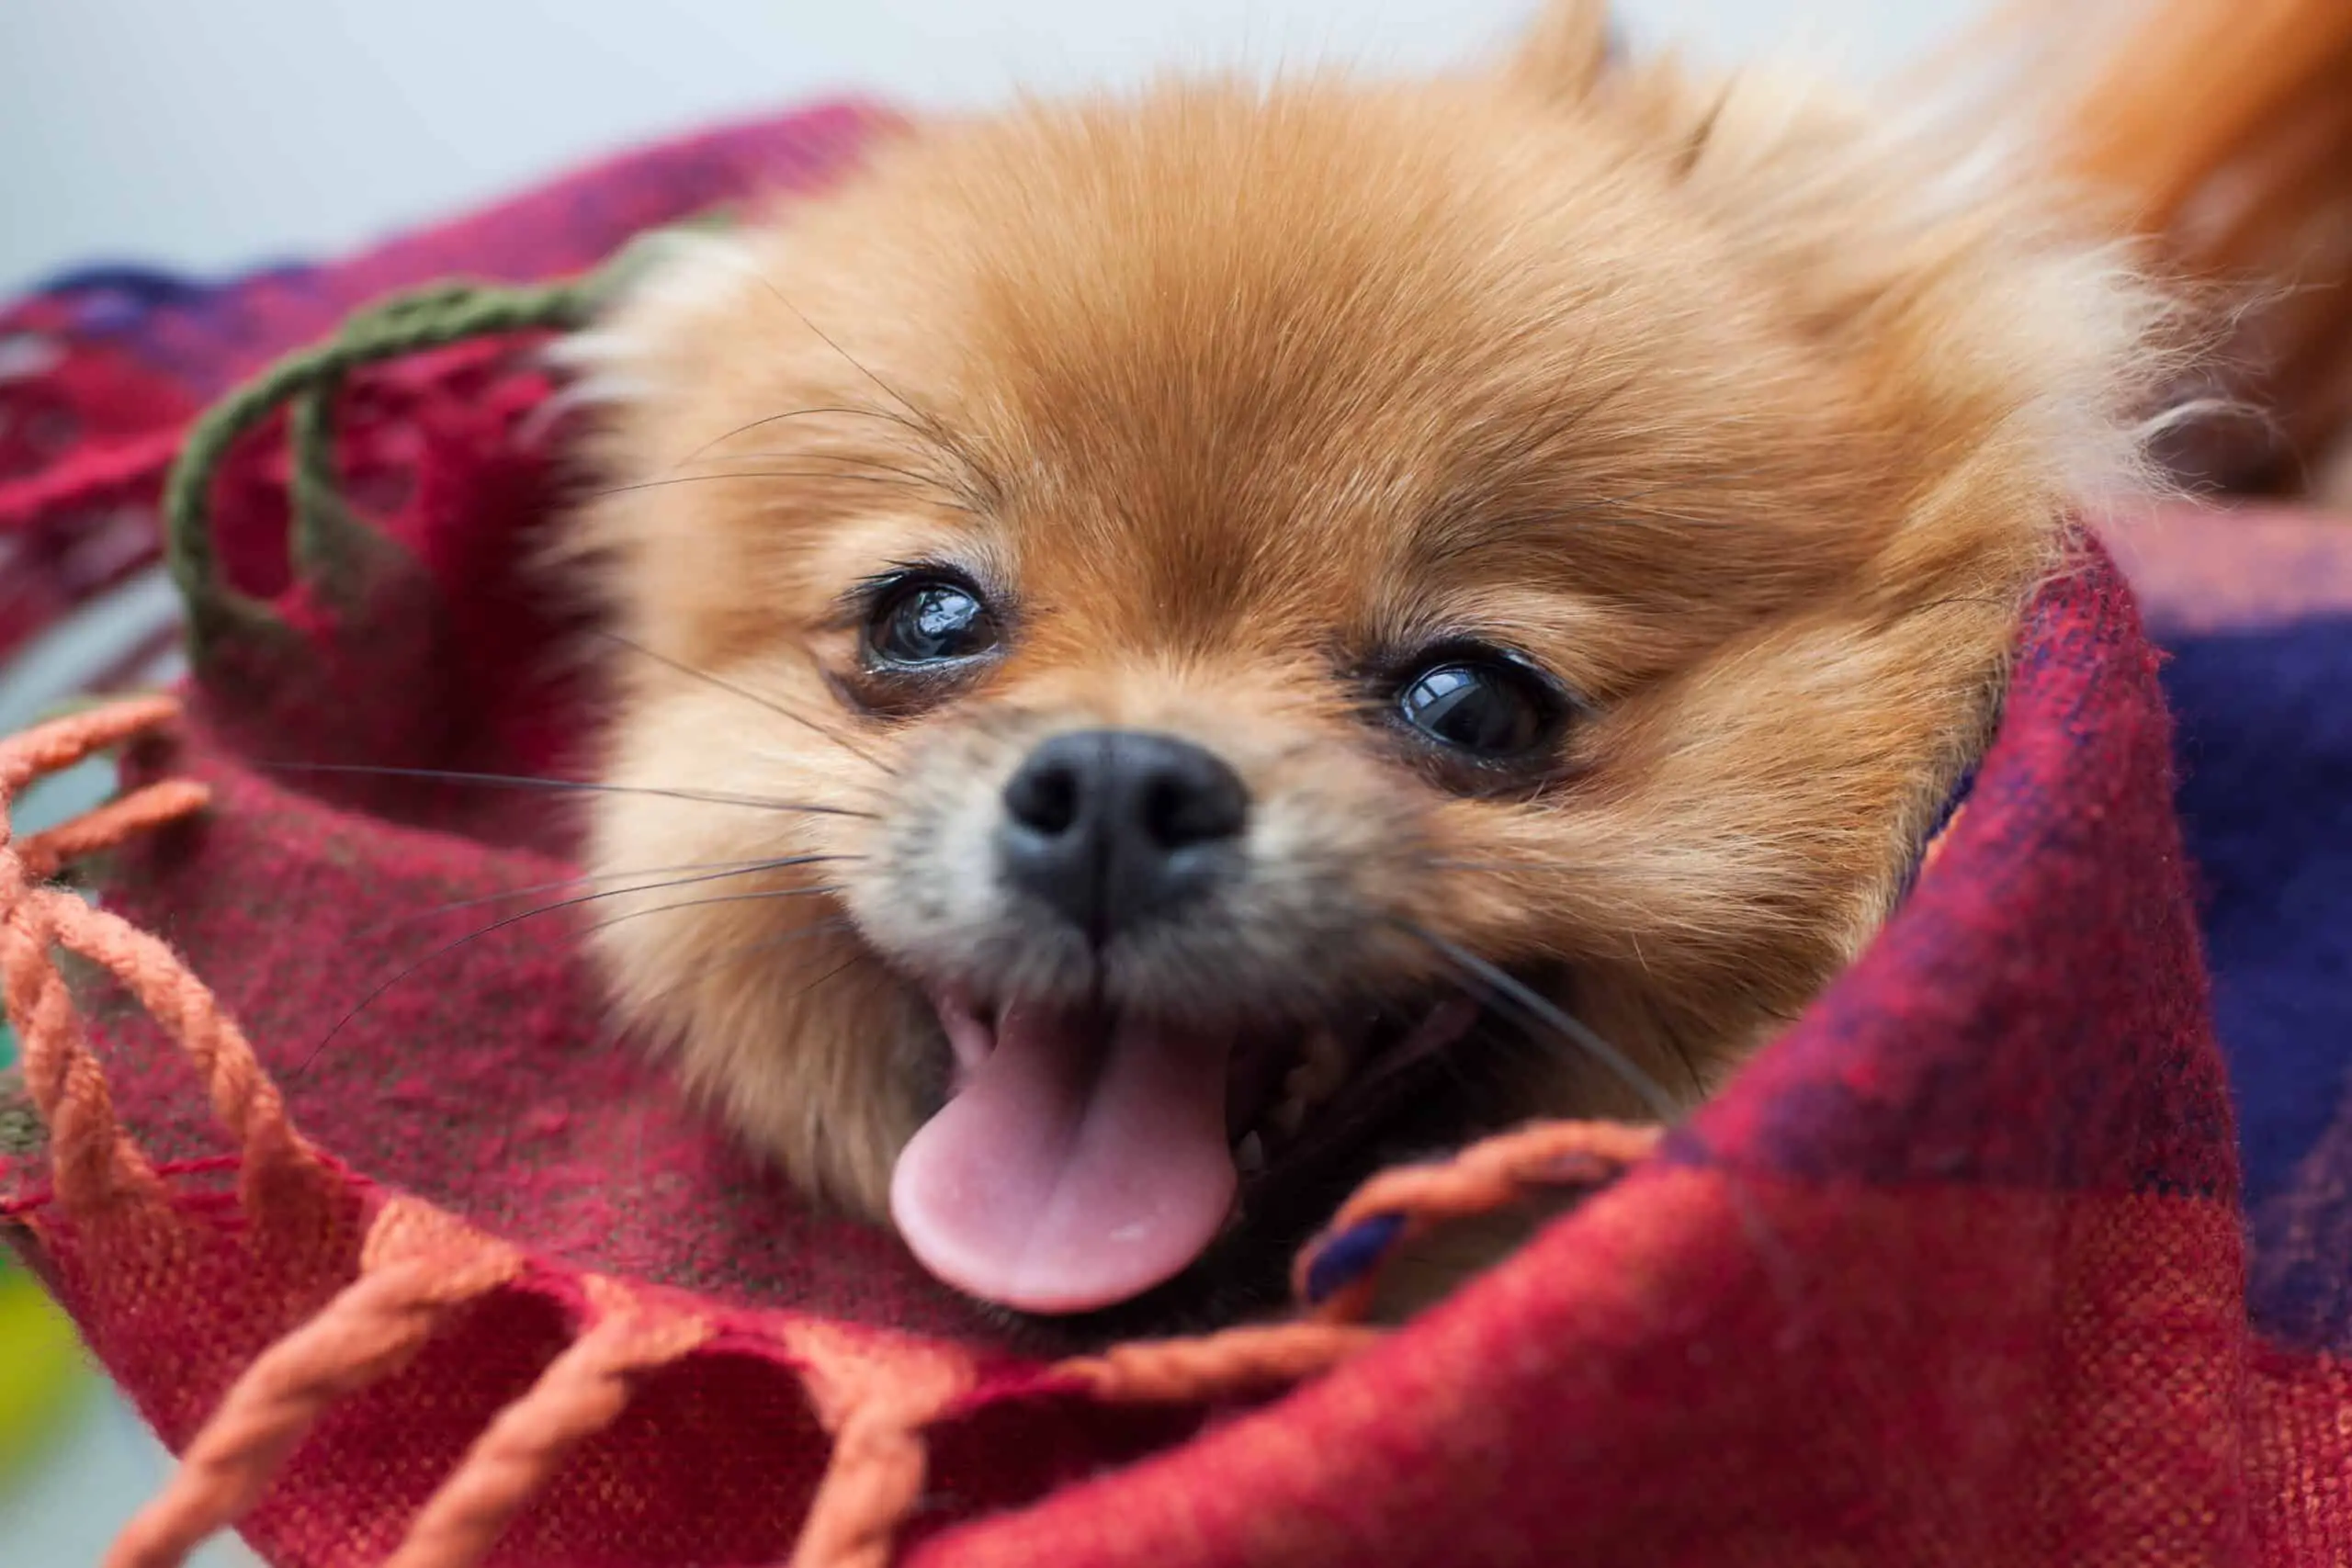 Teacup Pomeranian bundled up in red blanket with only head showing